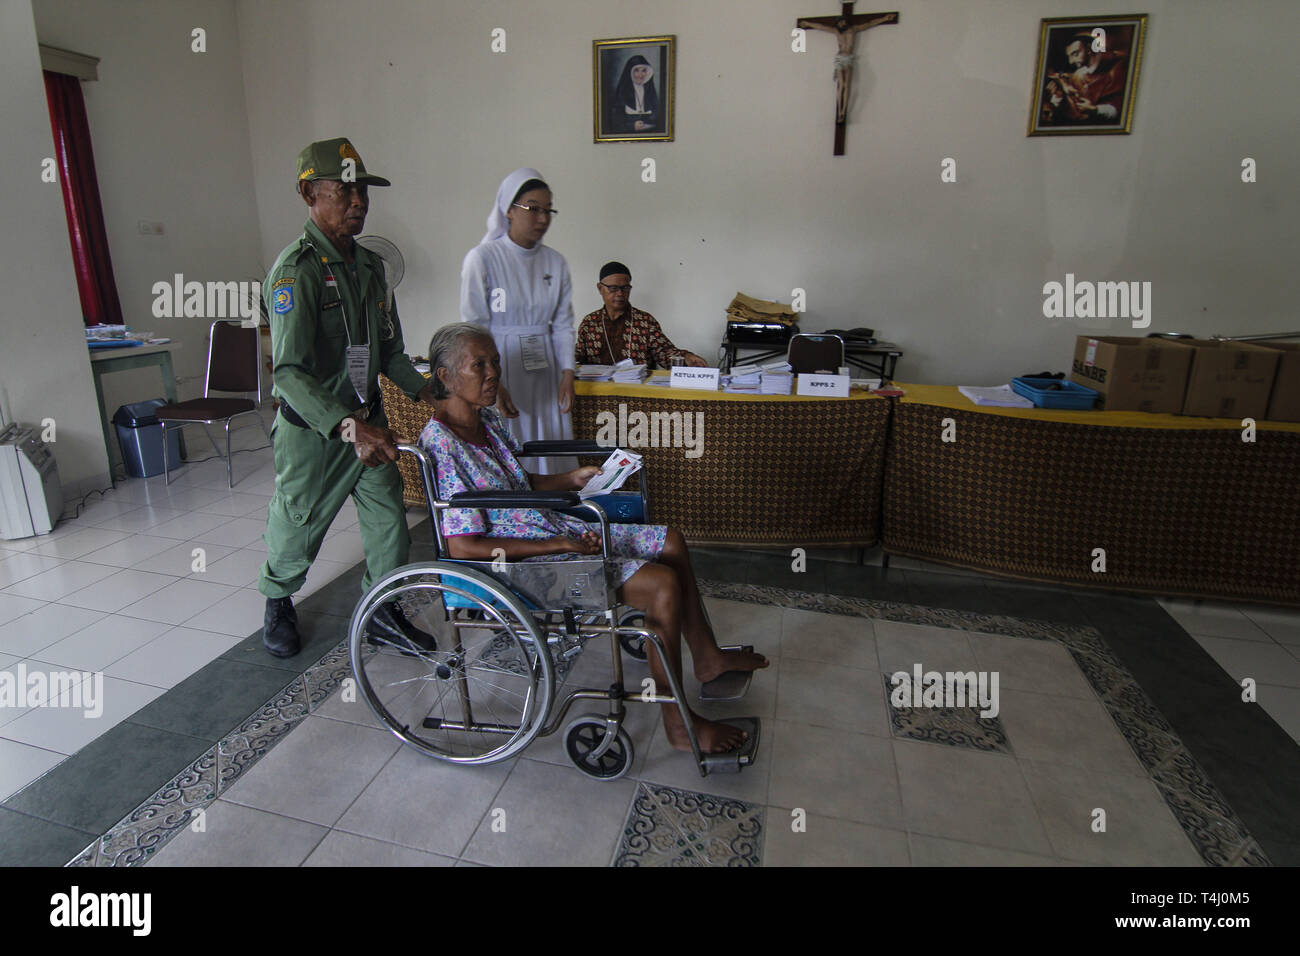 Yogyakarta, INDONESIA. 17th Apr, 2019. Voting officers assisted an elderly person to vote at a polling station in a monastery in Yogyakarta, Indonesia, Wednesday, April 17 2019. Millions of Indonesians voted in presidential and legislative elections with candidates for President Joko Widodo and Prabowo Subianto a former son-in-law general Suharto led Indonesia for 32 years. Credit: Slamet Riyadi/ZUMA Wire/Alamy Live News Stock Photo